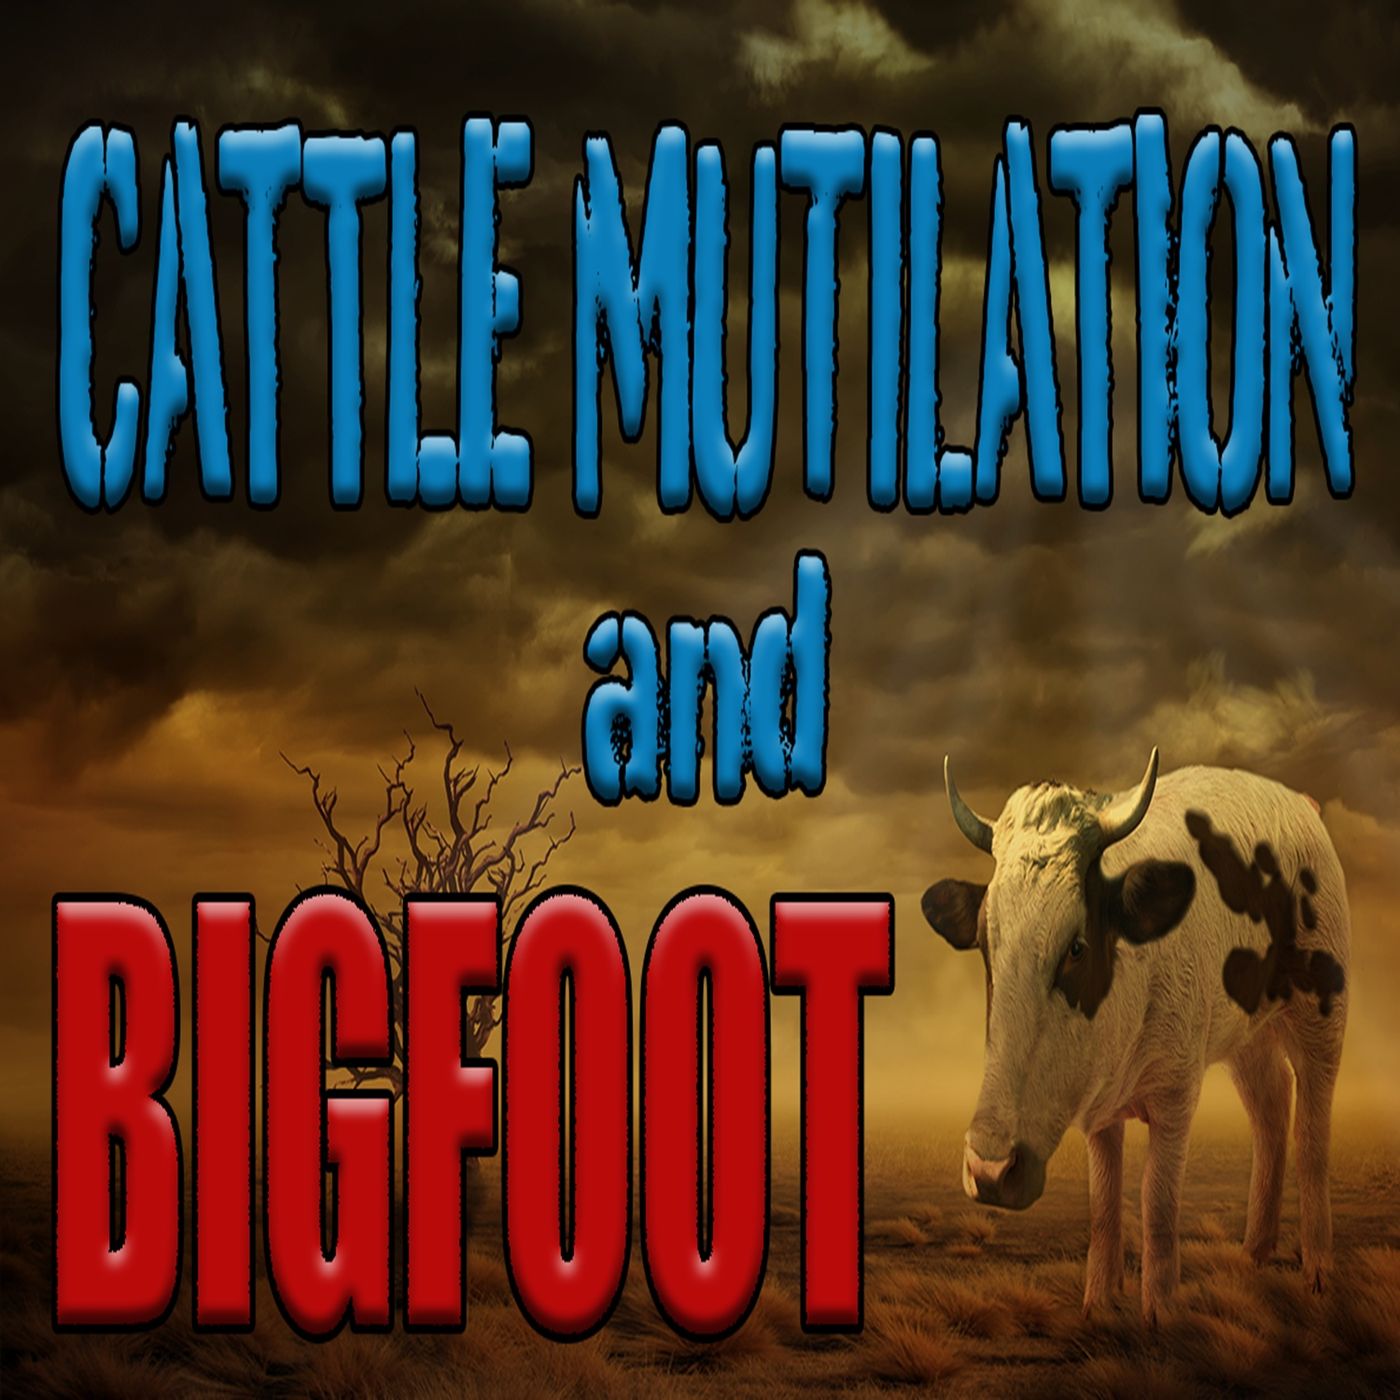 Bigfoot and Cattle Mutilations Confirmed